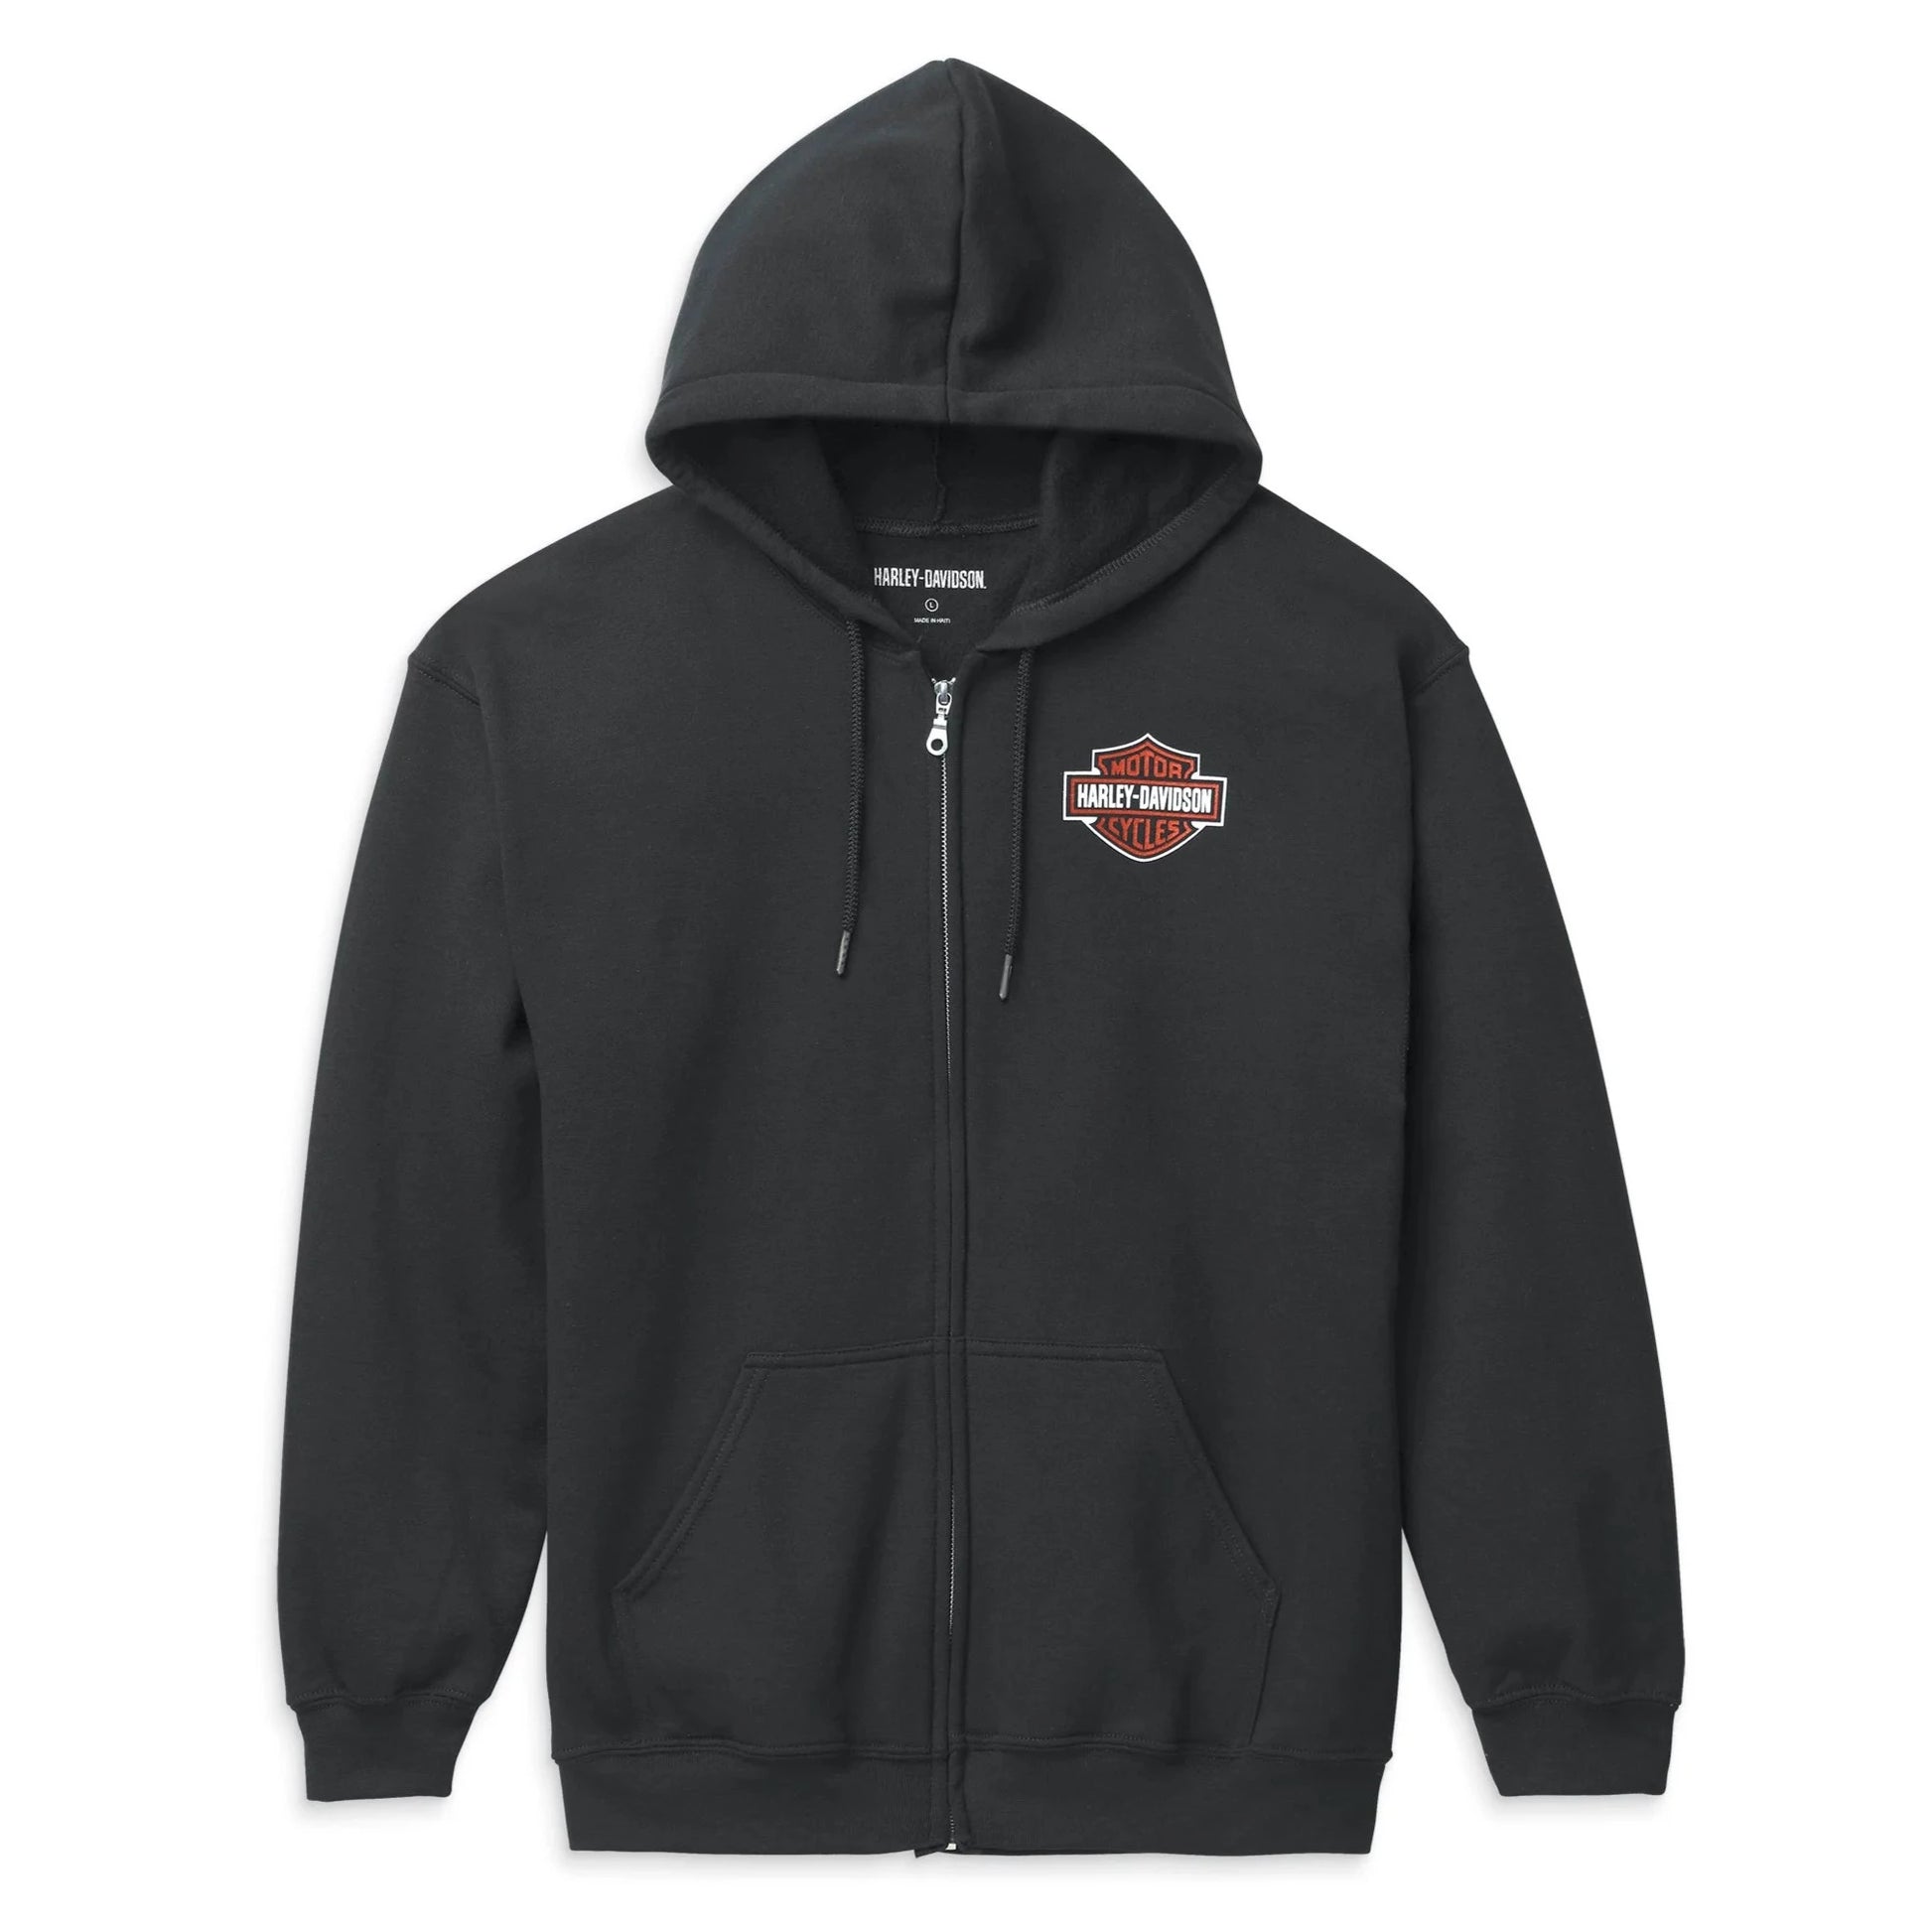 Harley-Davidson Hoodie Bar & Shield Zip Front Hoodie, 99122-22VM (small Bar & Shield logo on left chest with zip up front)